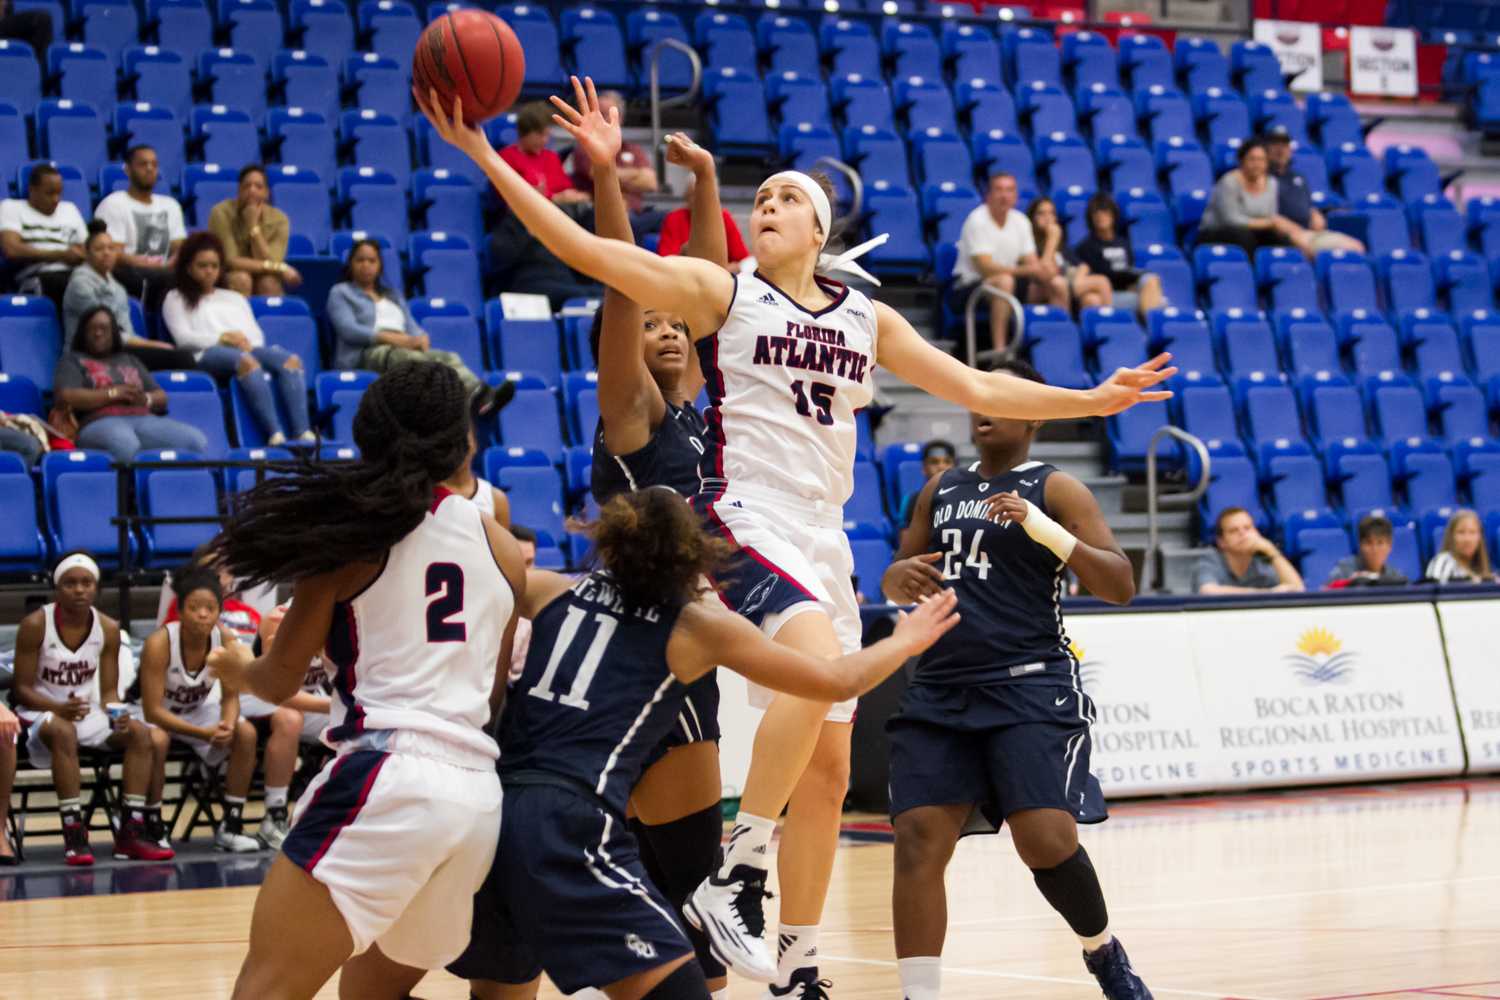 Cedeno attempts a shot in traffic. She was 1-of-9 in the Owls’ loss to ODU on Jan. 31.